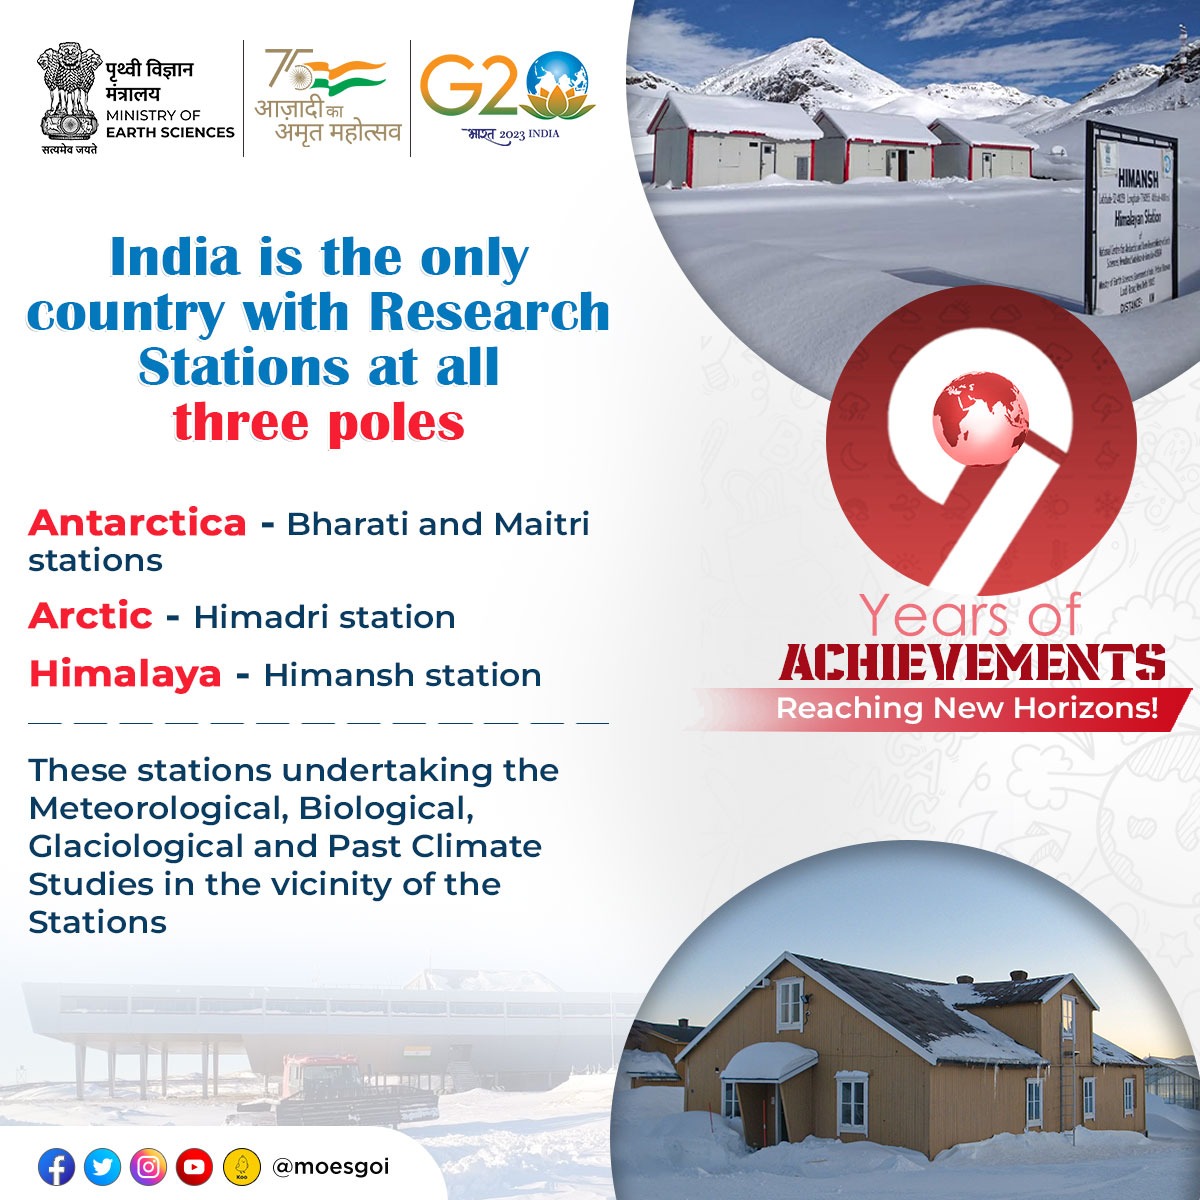 #9YearsOfSeva #MyMoES

#NewIndia leads the global fight against #ClimateChange!

Strengthening the Polar Programme,

The research stations in #Antarctica, #Arctic & #Himalaya, are equipped with cutting-edge technologies that are invaluable for conducting research in a variety of…